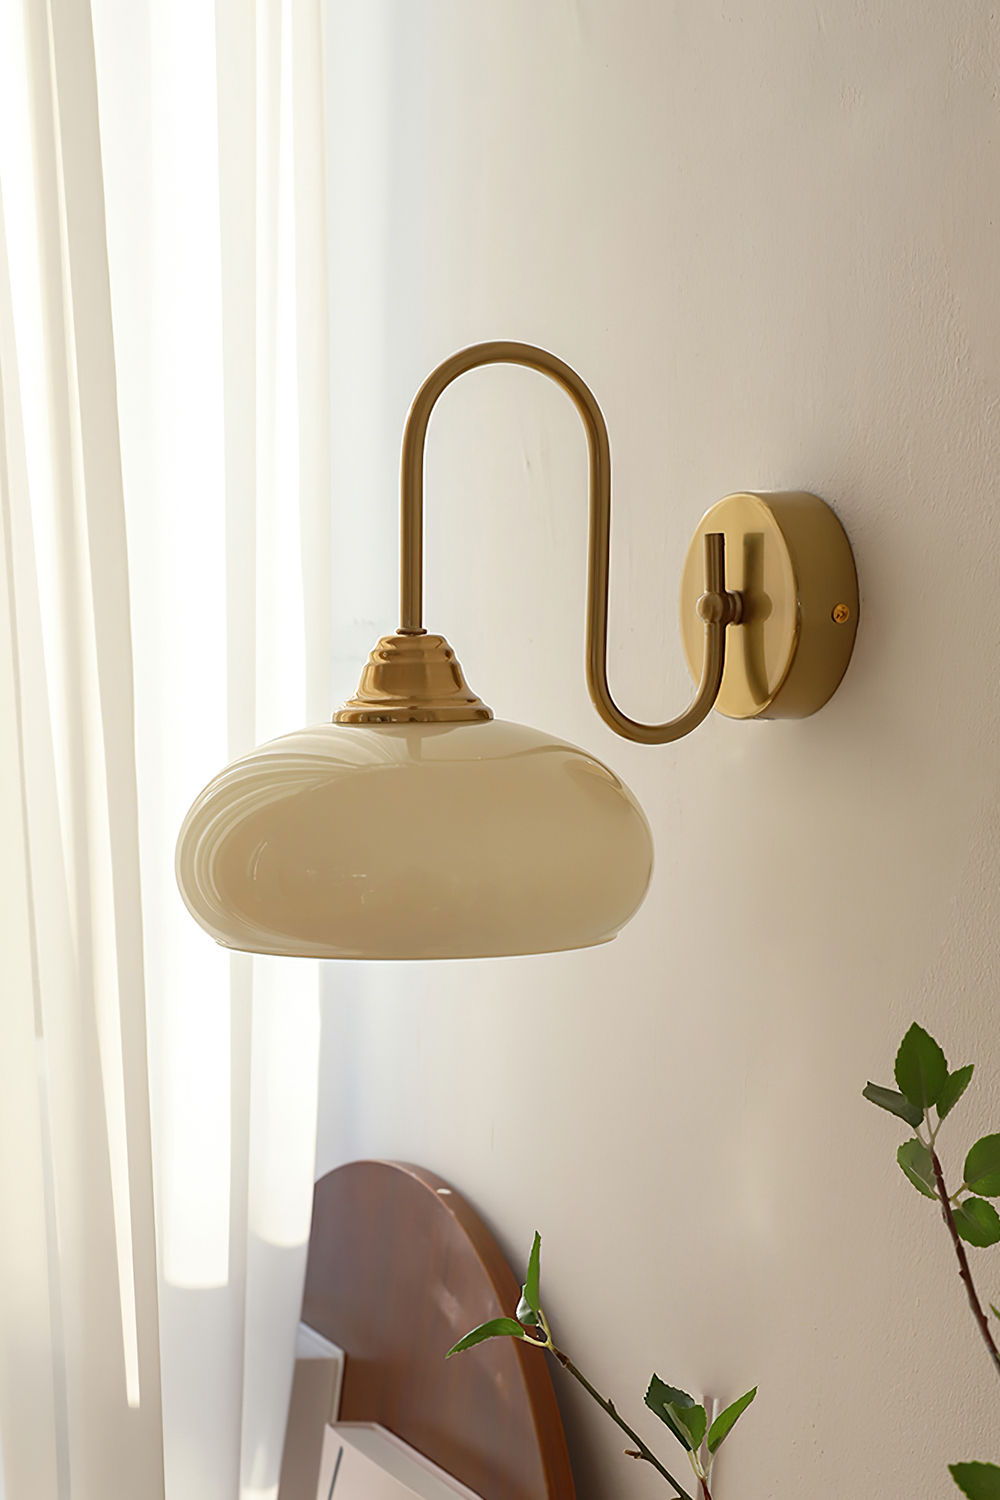 Wall Lamp Luminaire “Enhance Your Home Decor with Stylish Wall Lights”